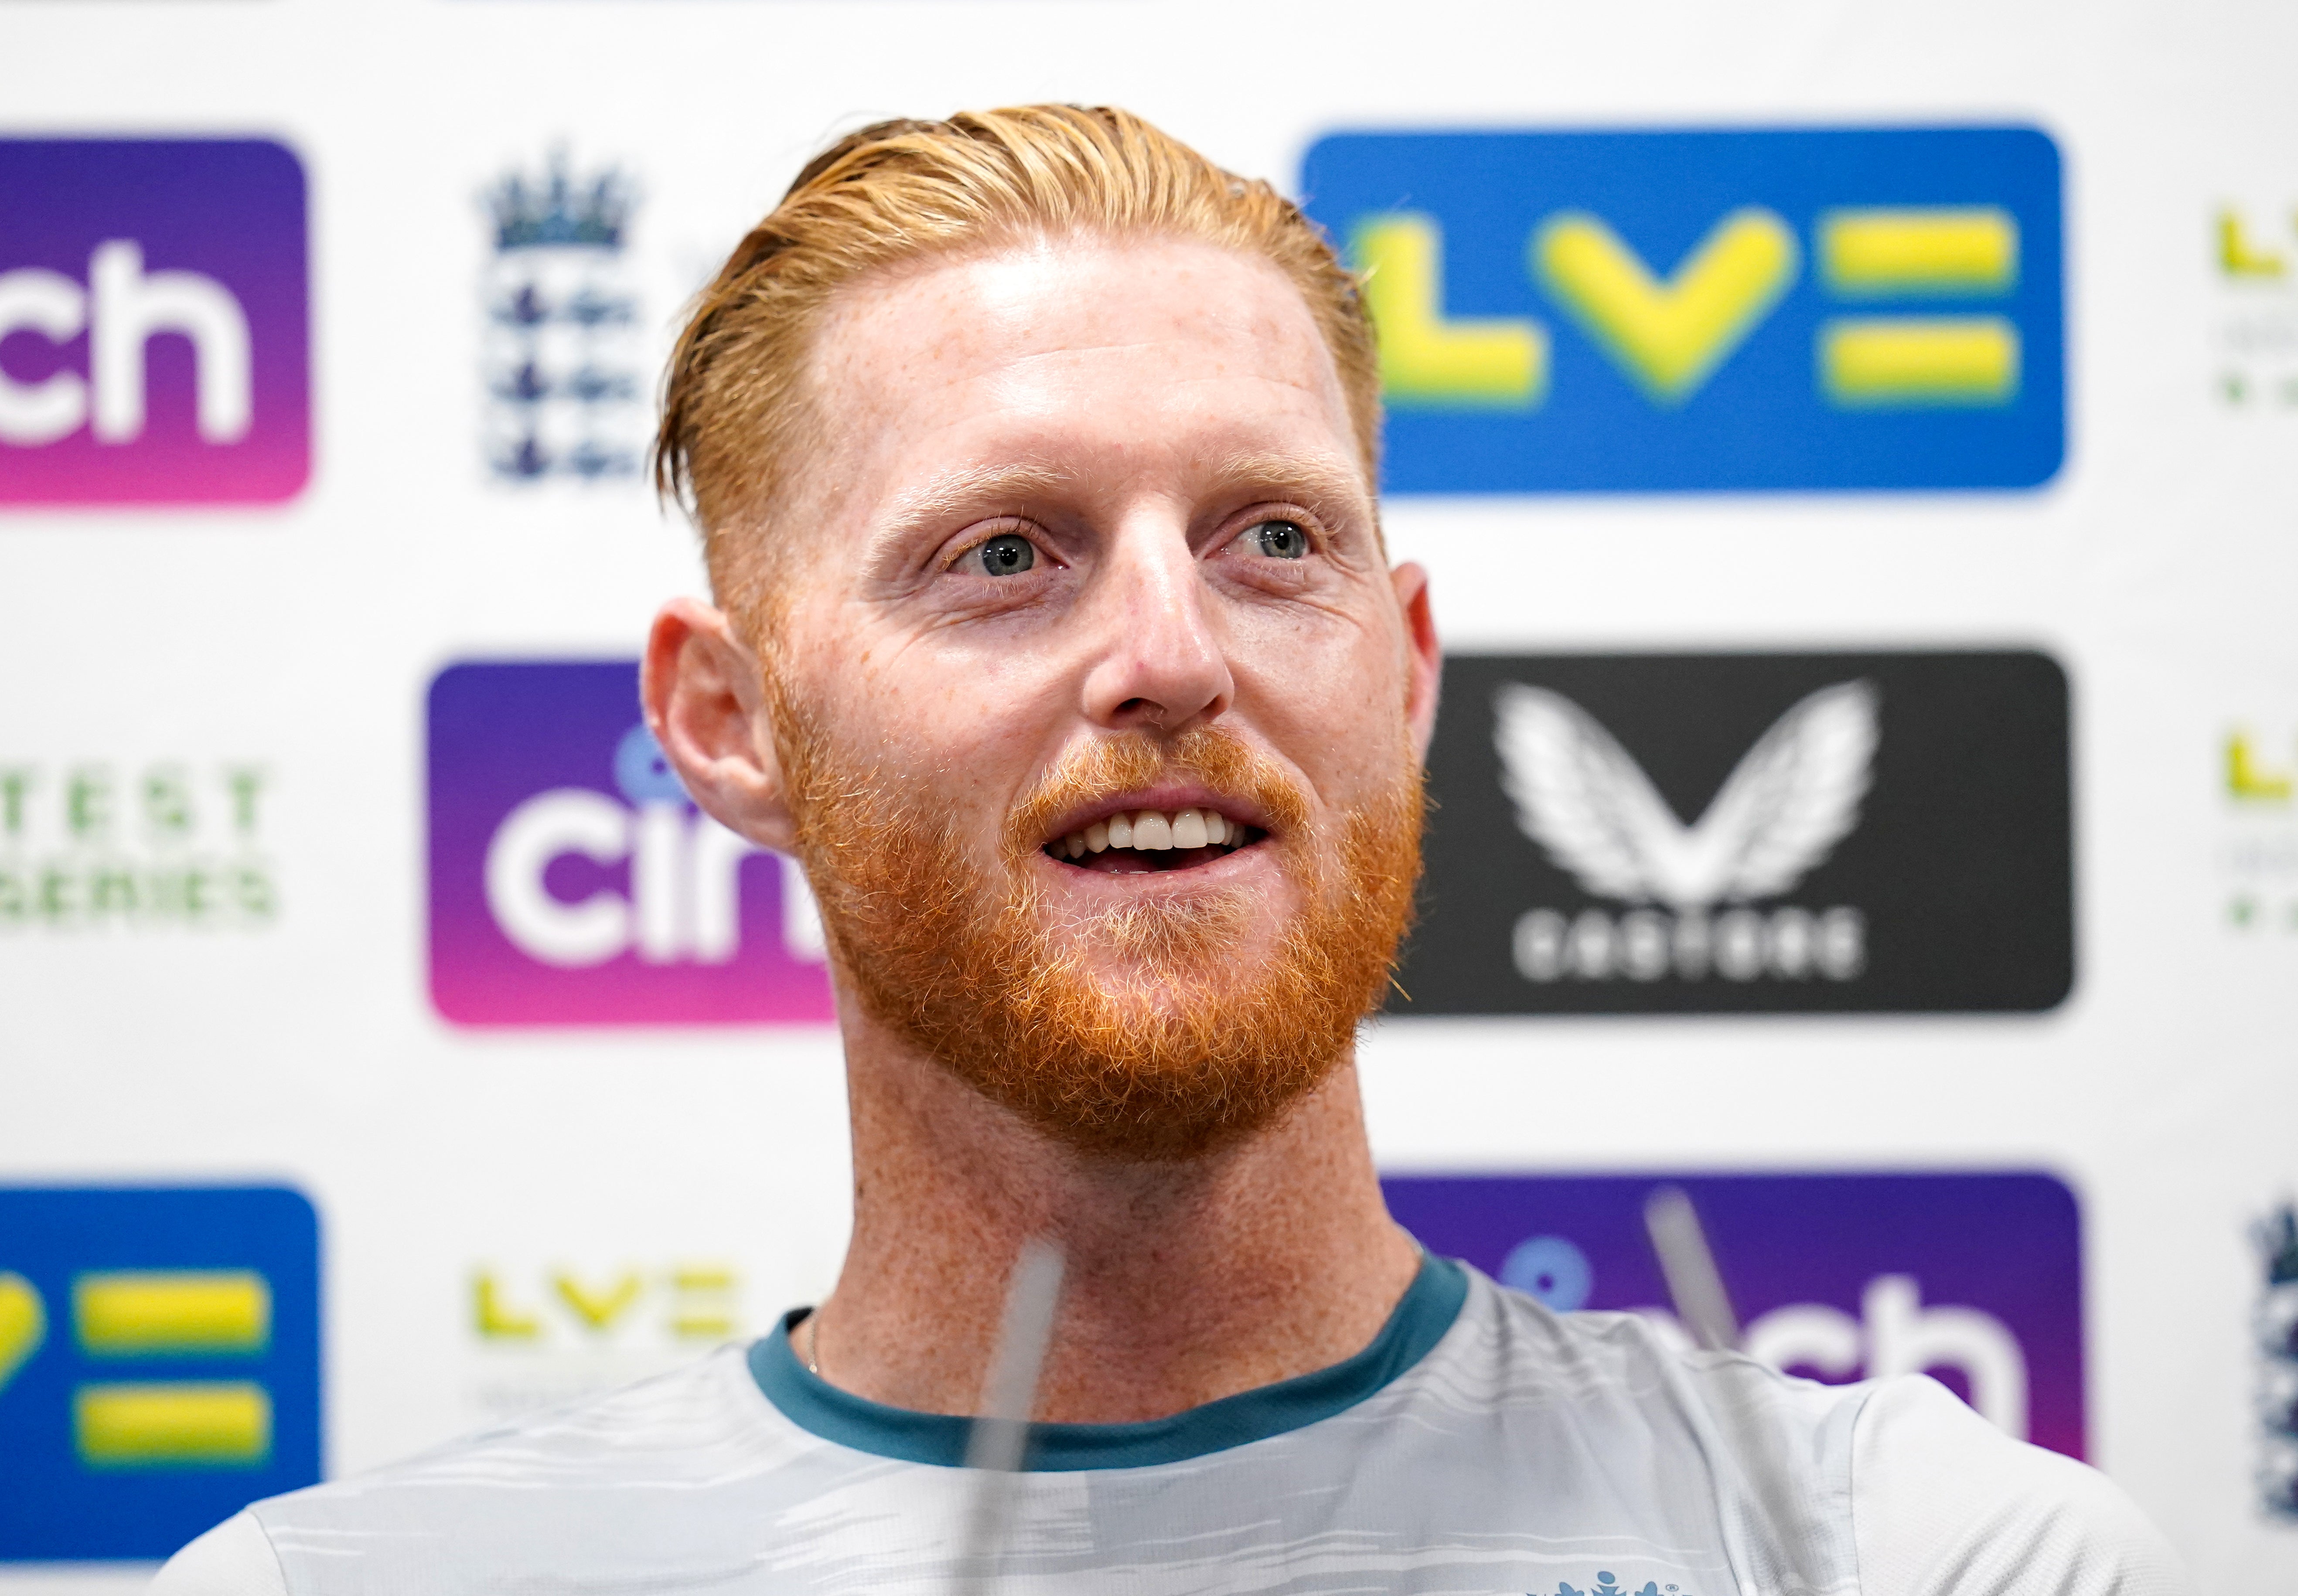 Ben Stokes insists England will not change their new ultra-aggressive approach in Test cricket (John Walton/PA)